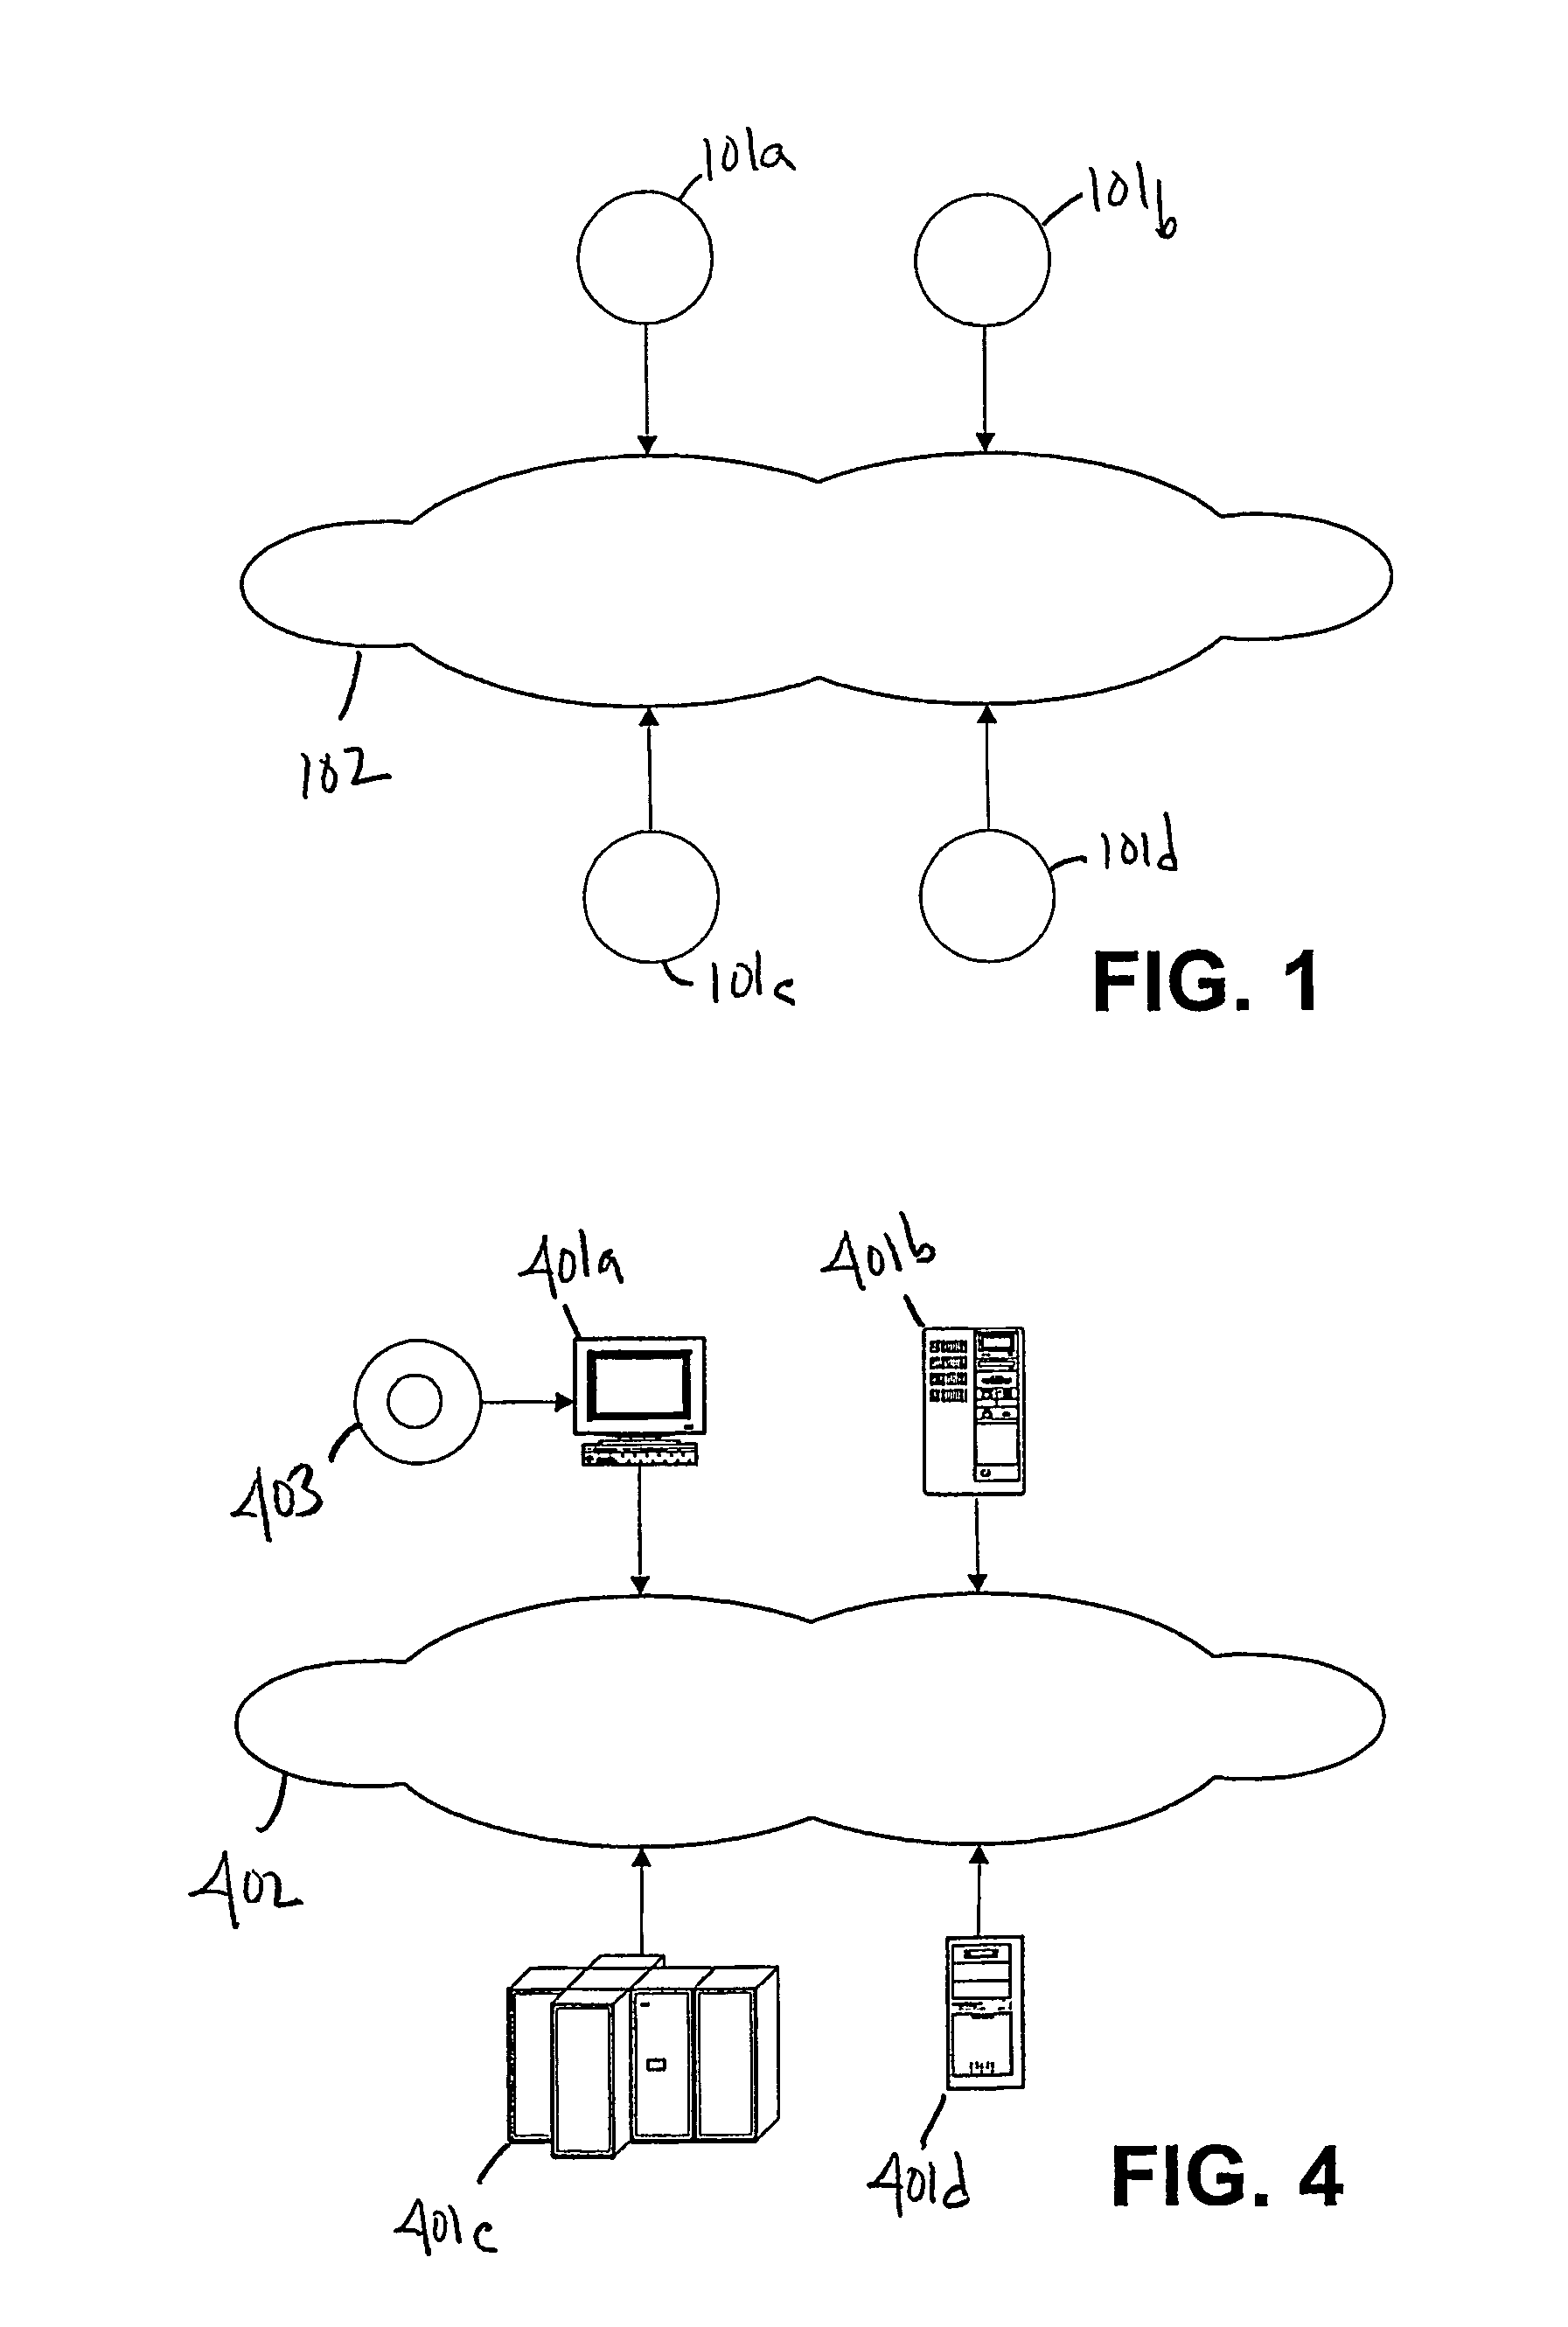 Method and system for implementing evolutionary algorithms